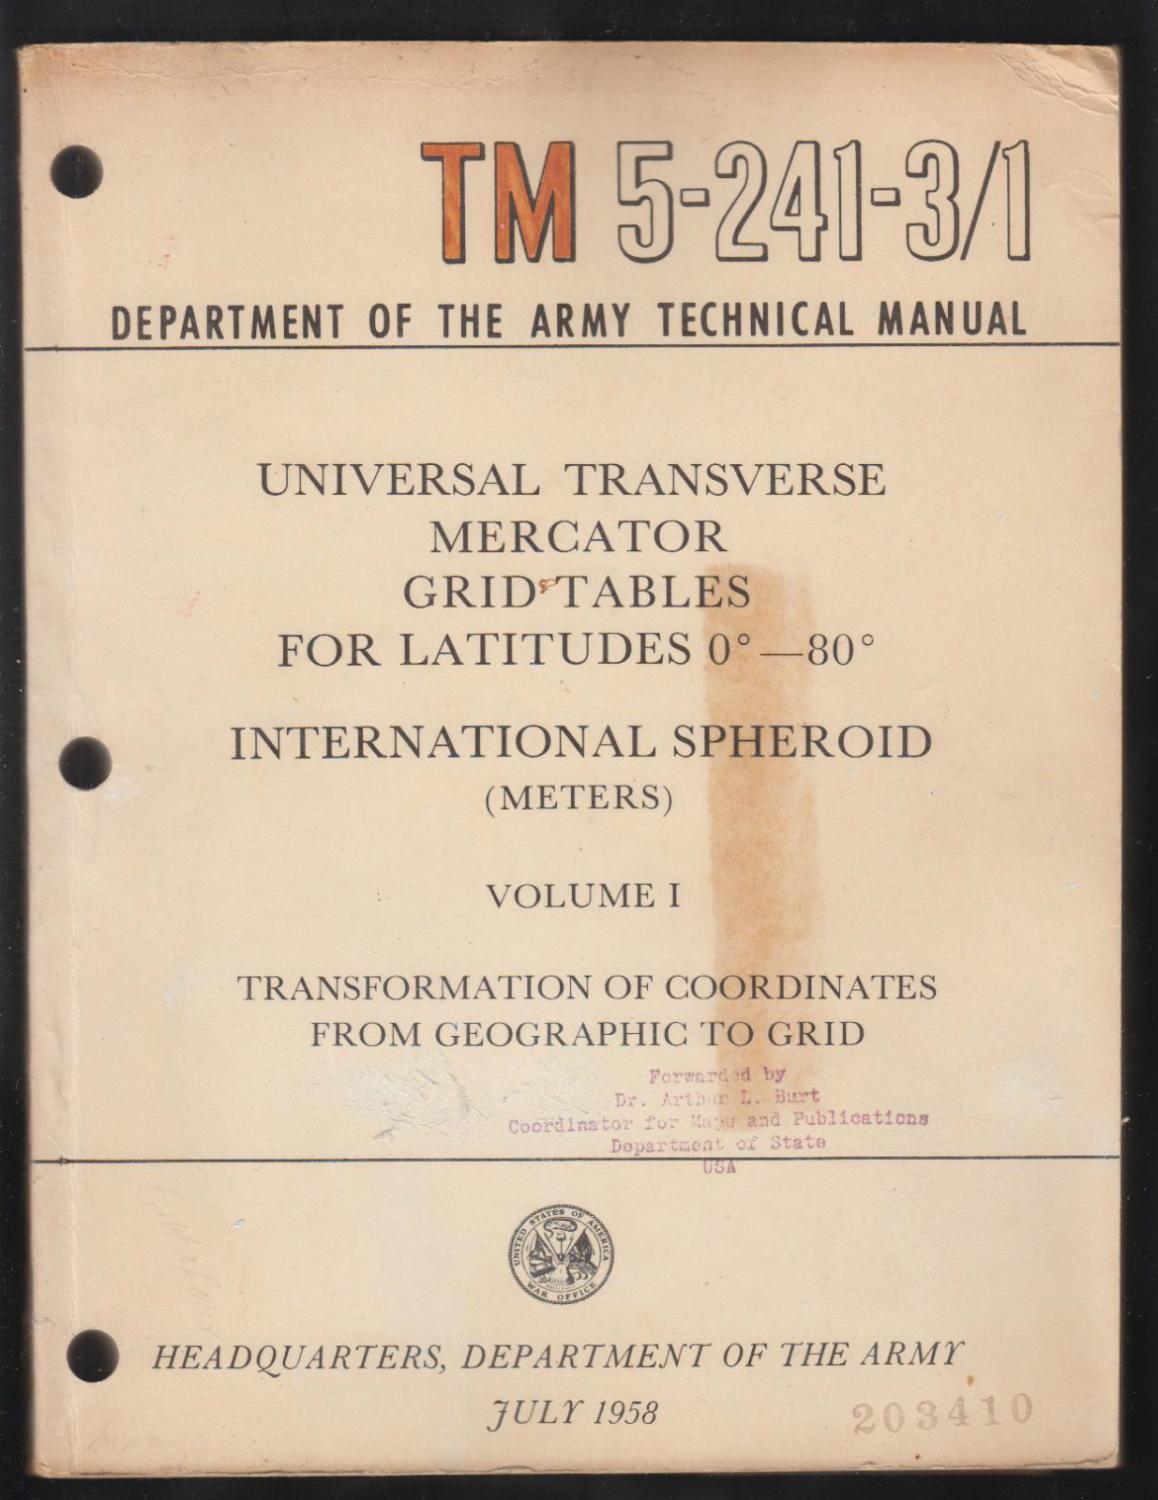 Department of the Army Technical Manual TM 52413/1. Universal